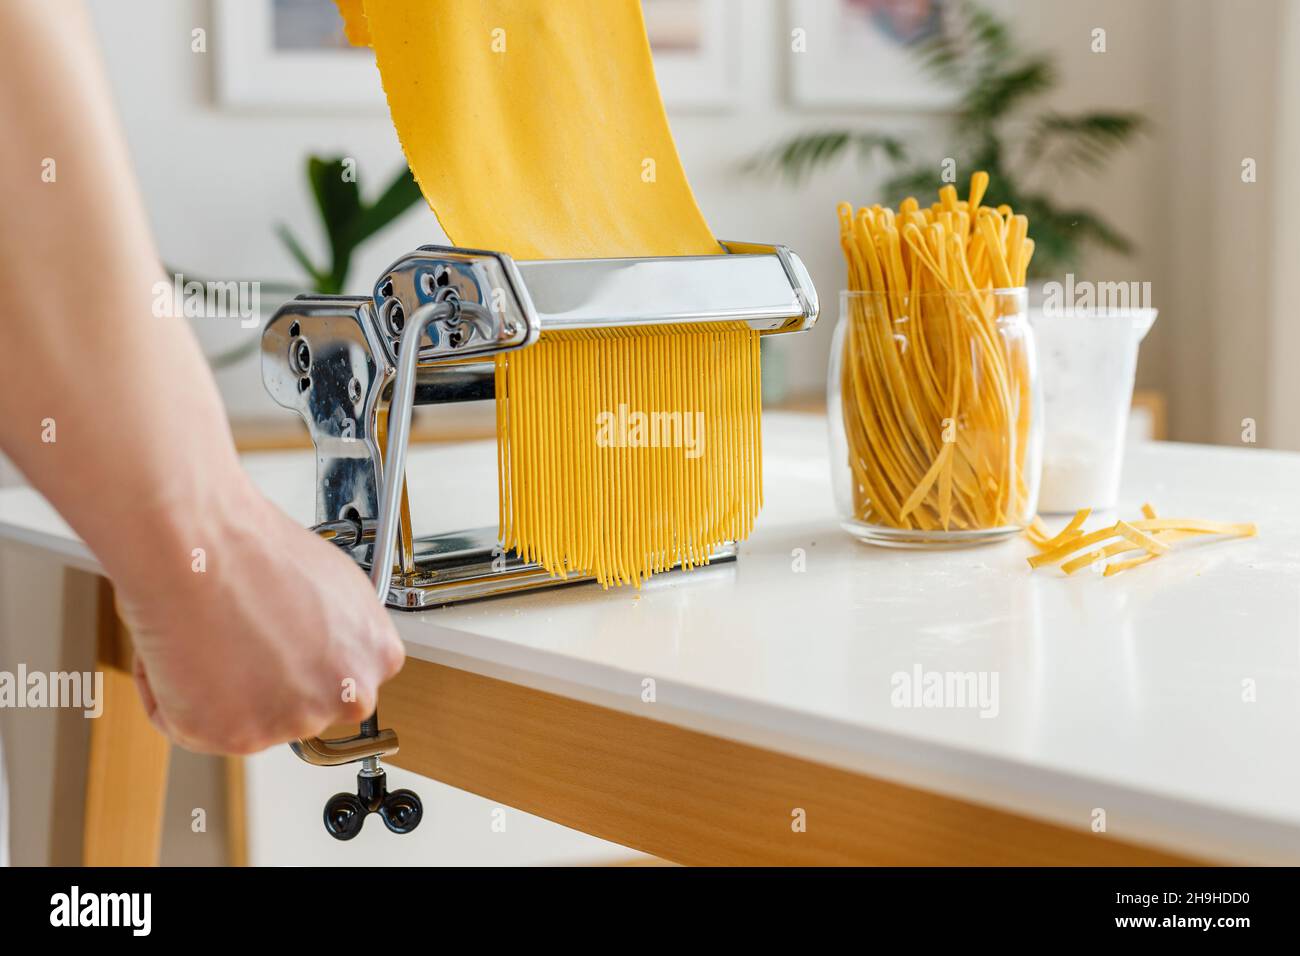 https://c8.alamy.com/comp/2H9HDD0/man-in-apron-making-spaghetti-with-noodle-cutter-close-up-pasta-cooking-at-home-preparing-food-from-bright-yellow-dough-2H9HDD0.jpg